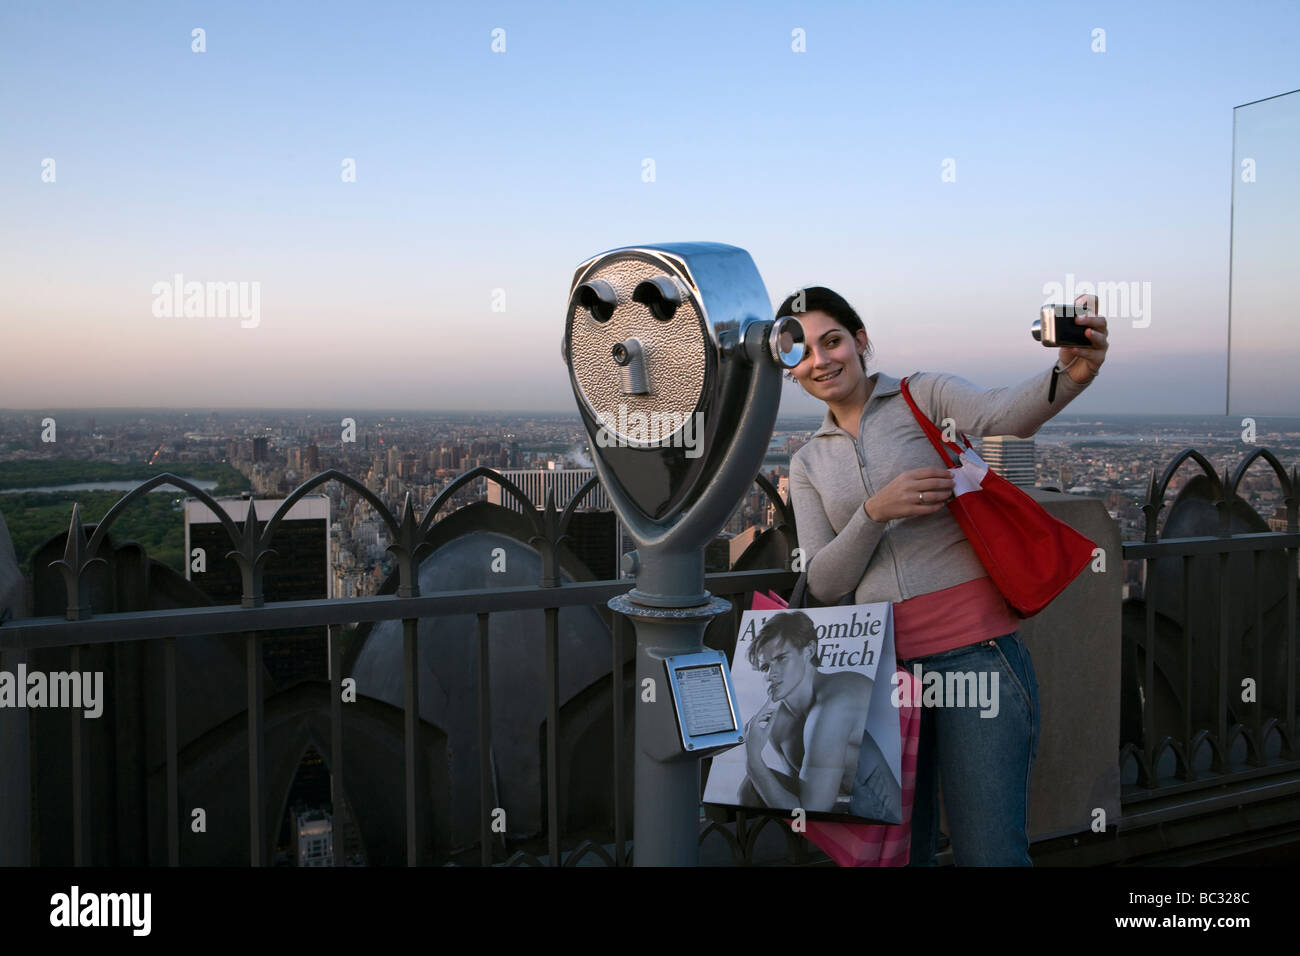 A young woman takes a self portrait on the Rockefeller Center observation deck in New York. Stock Photo